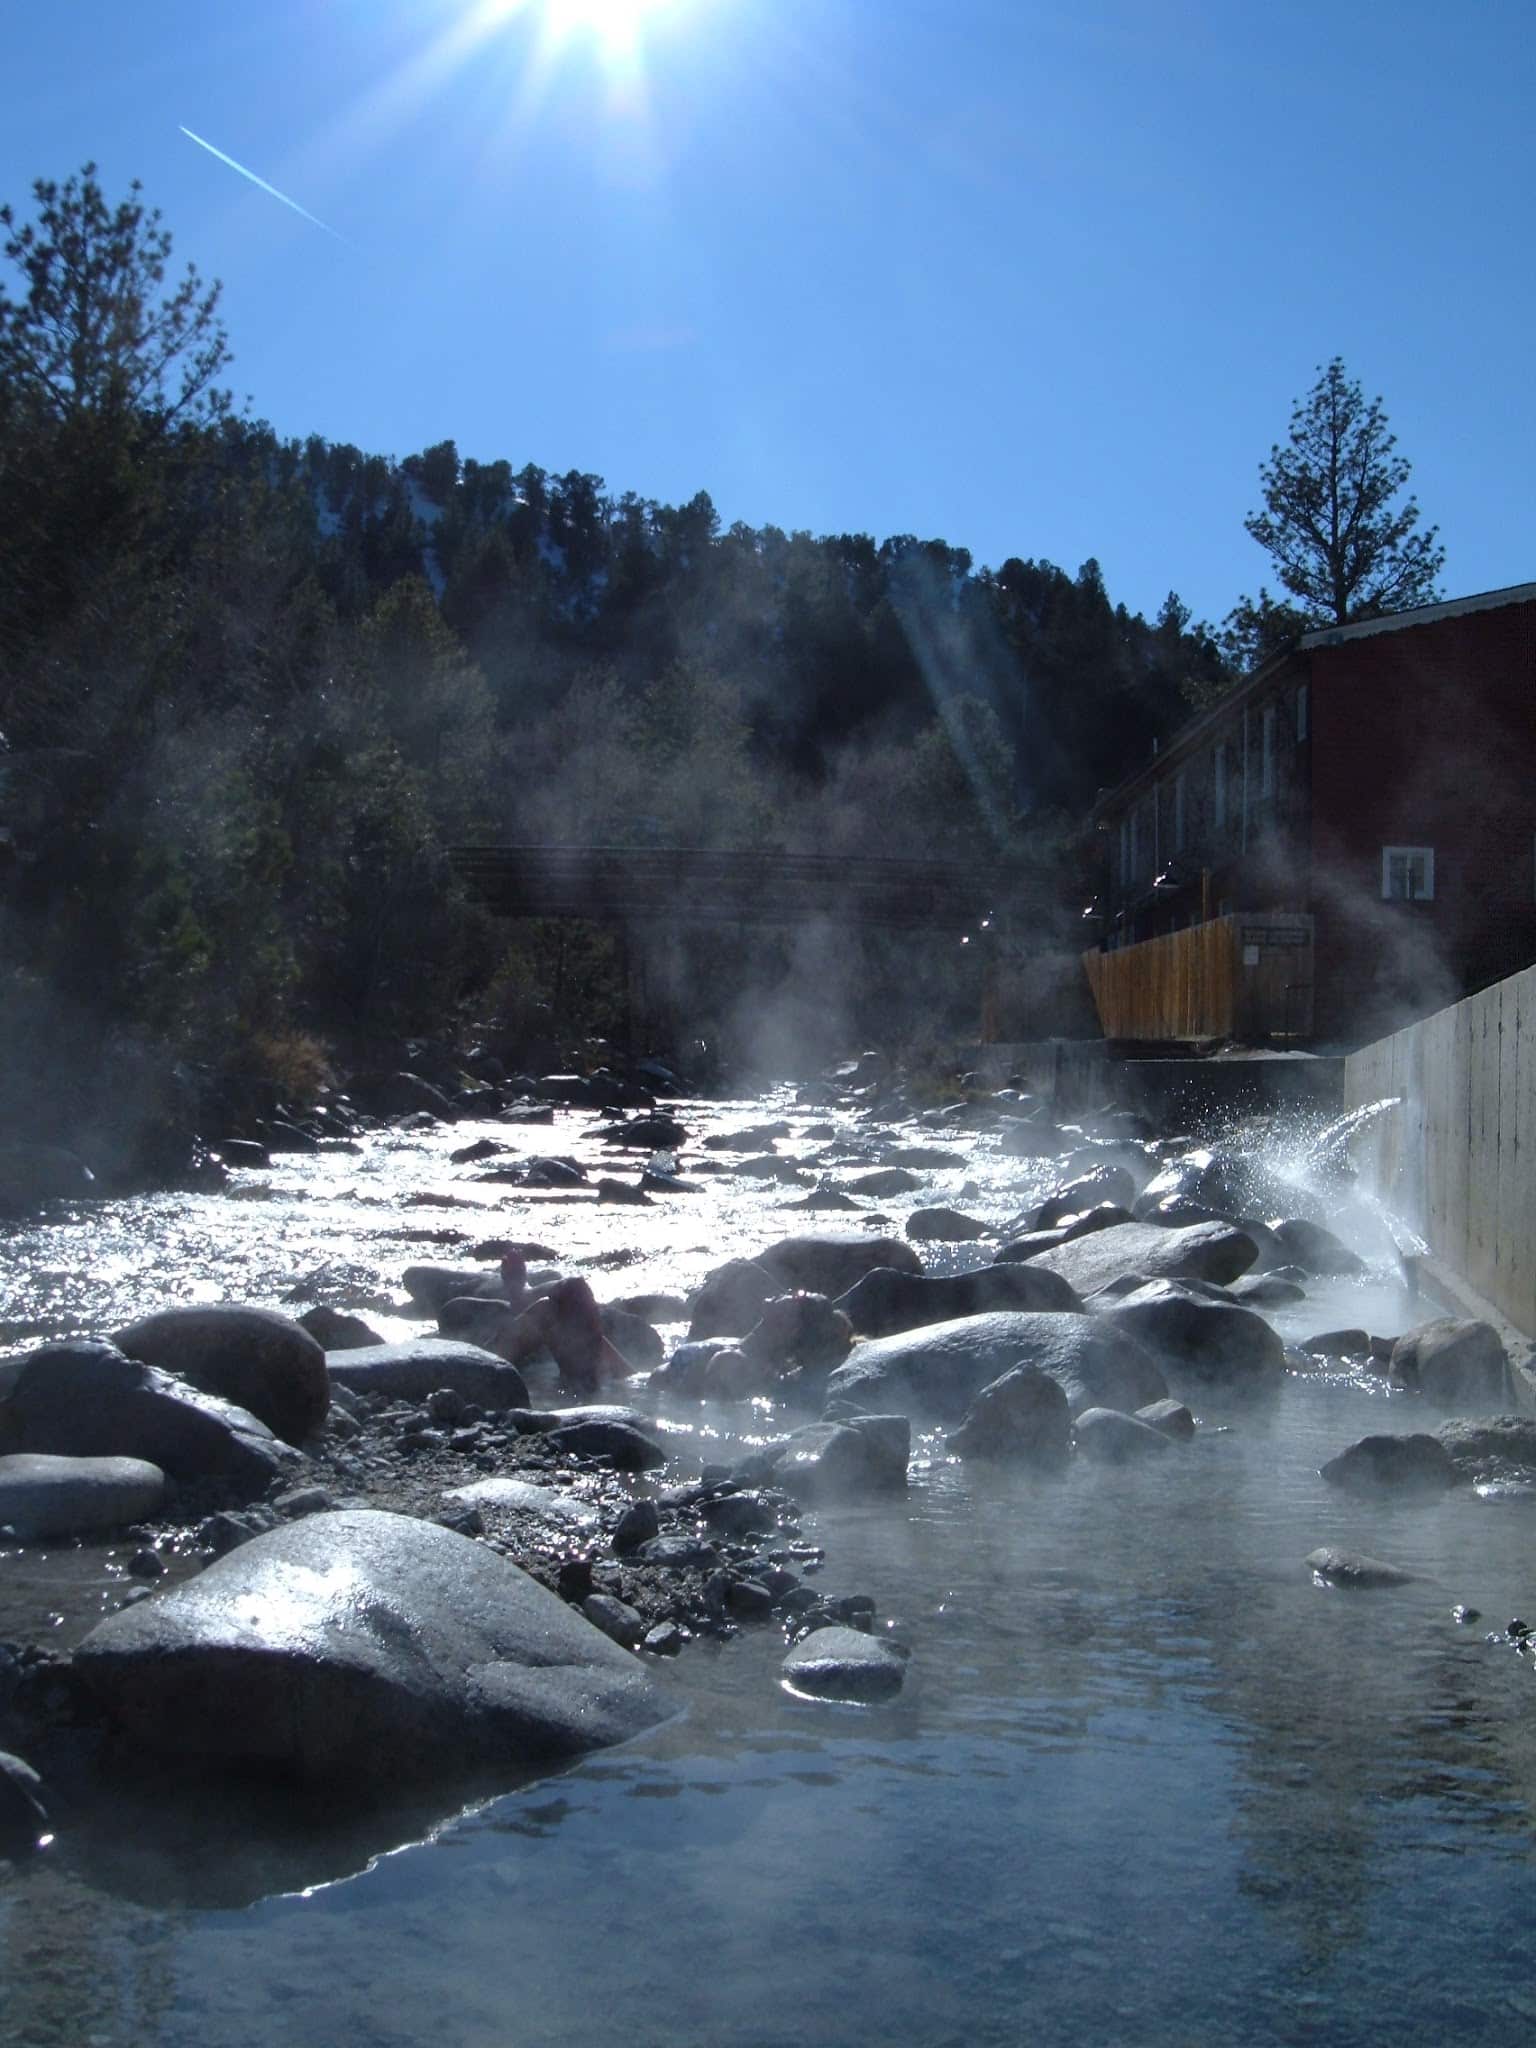 Winter day at a creekside hot springs.